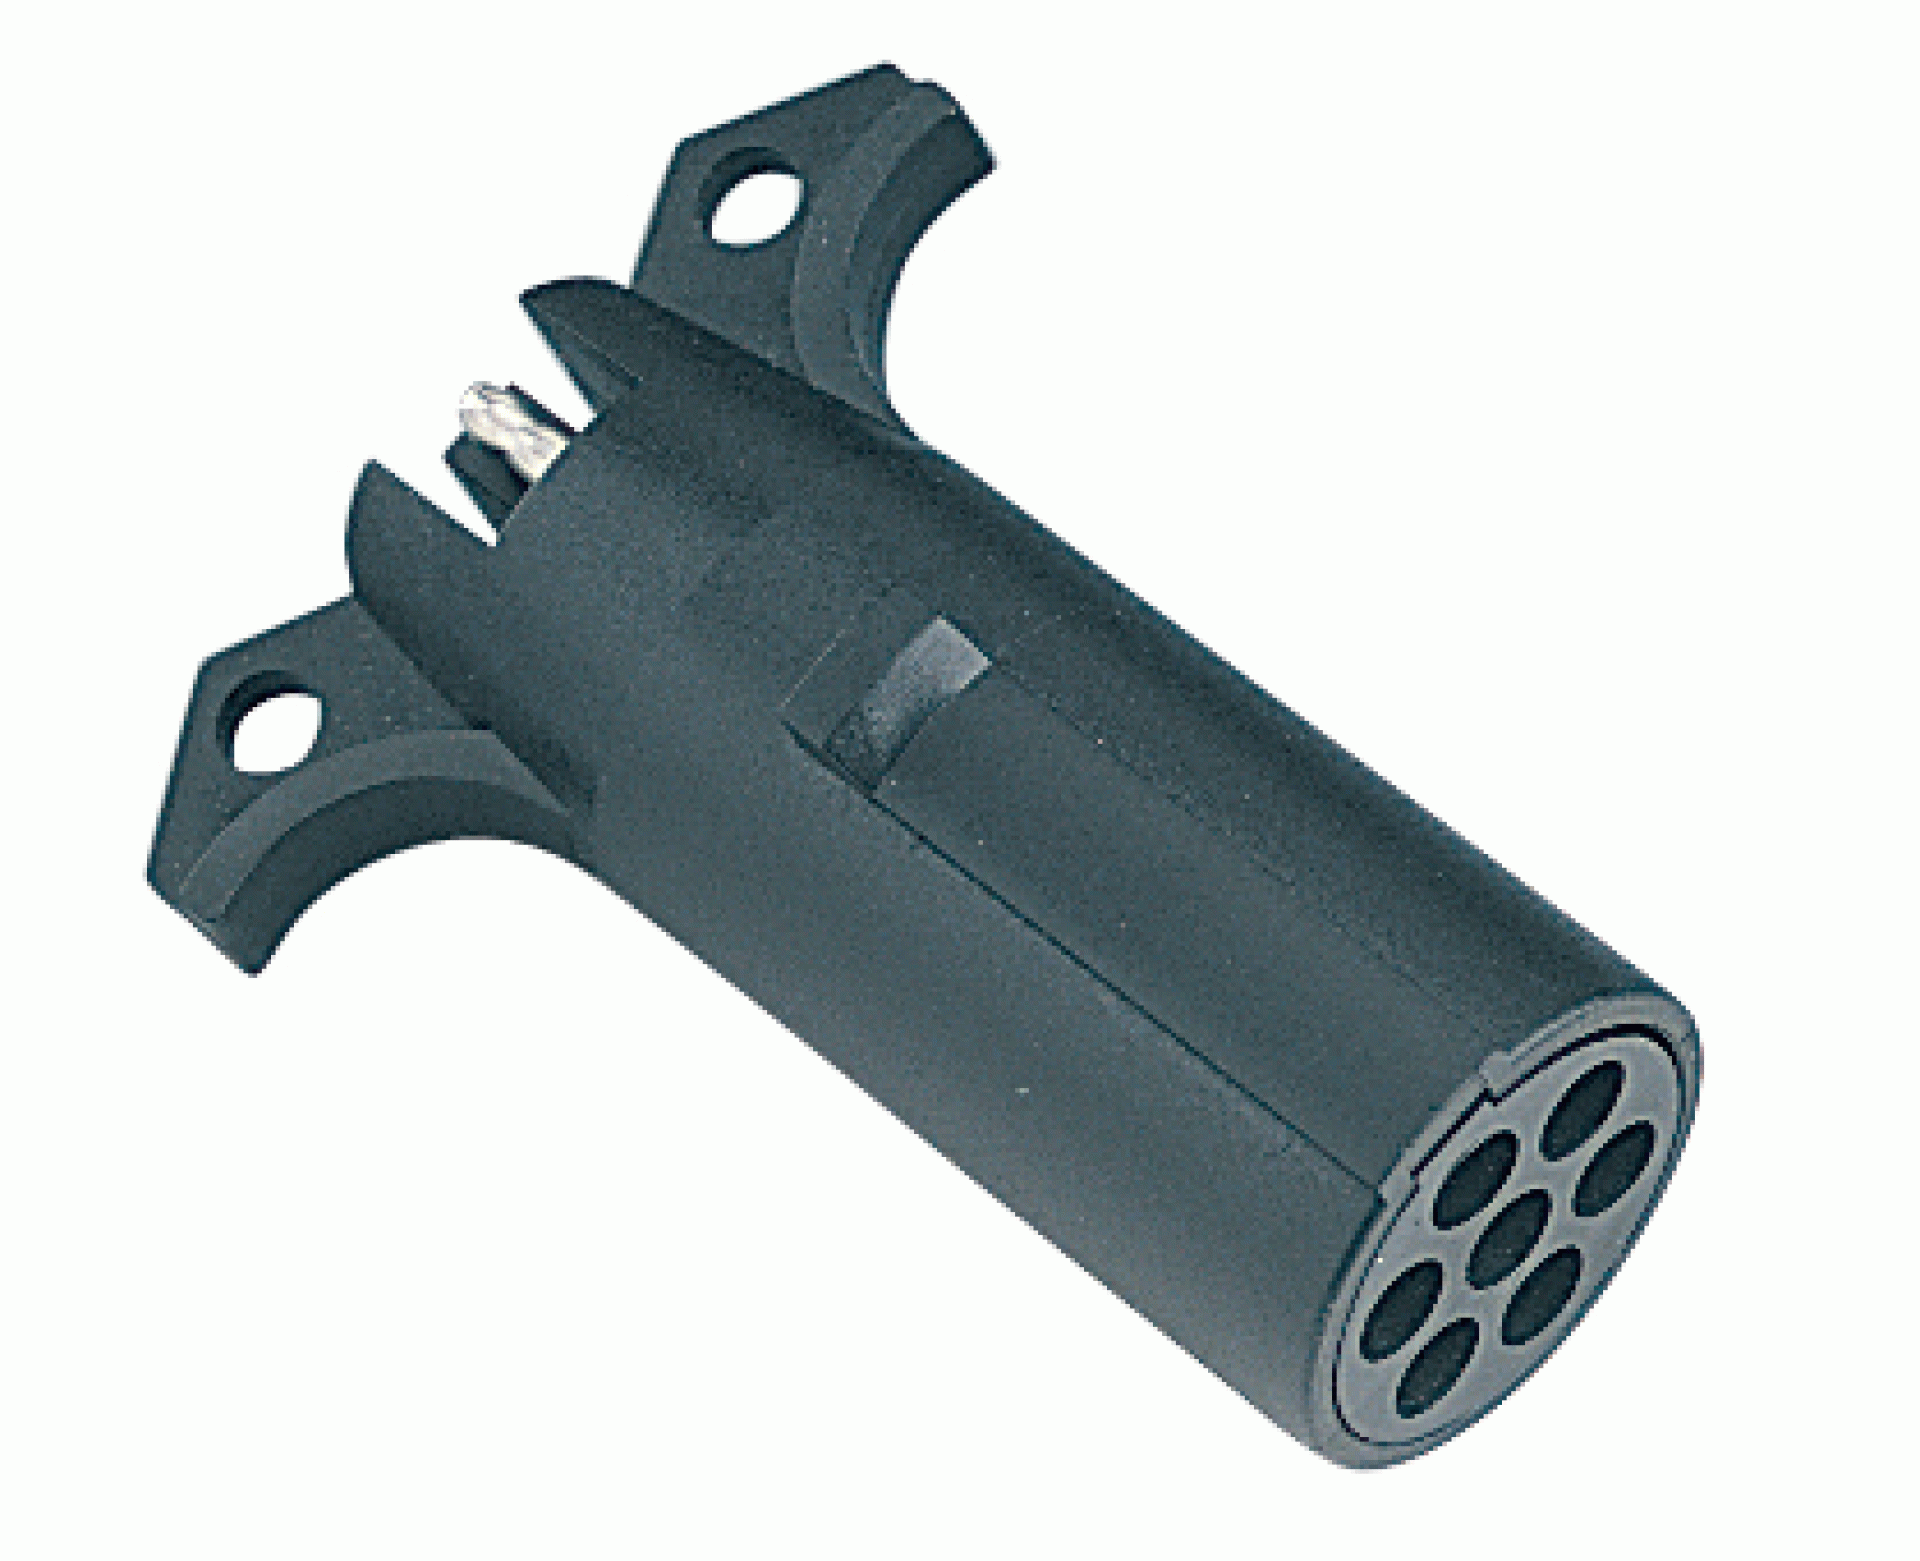 HOPKINS MFG CORP | 47405 | CONNECTOR ADAPTER 7 ROUND TO 4 FLAT ONE PIECE MOLDED